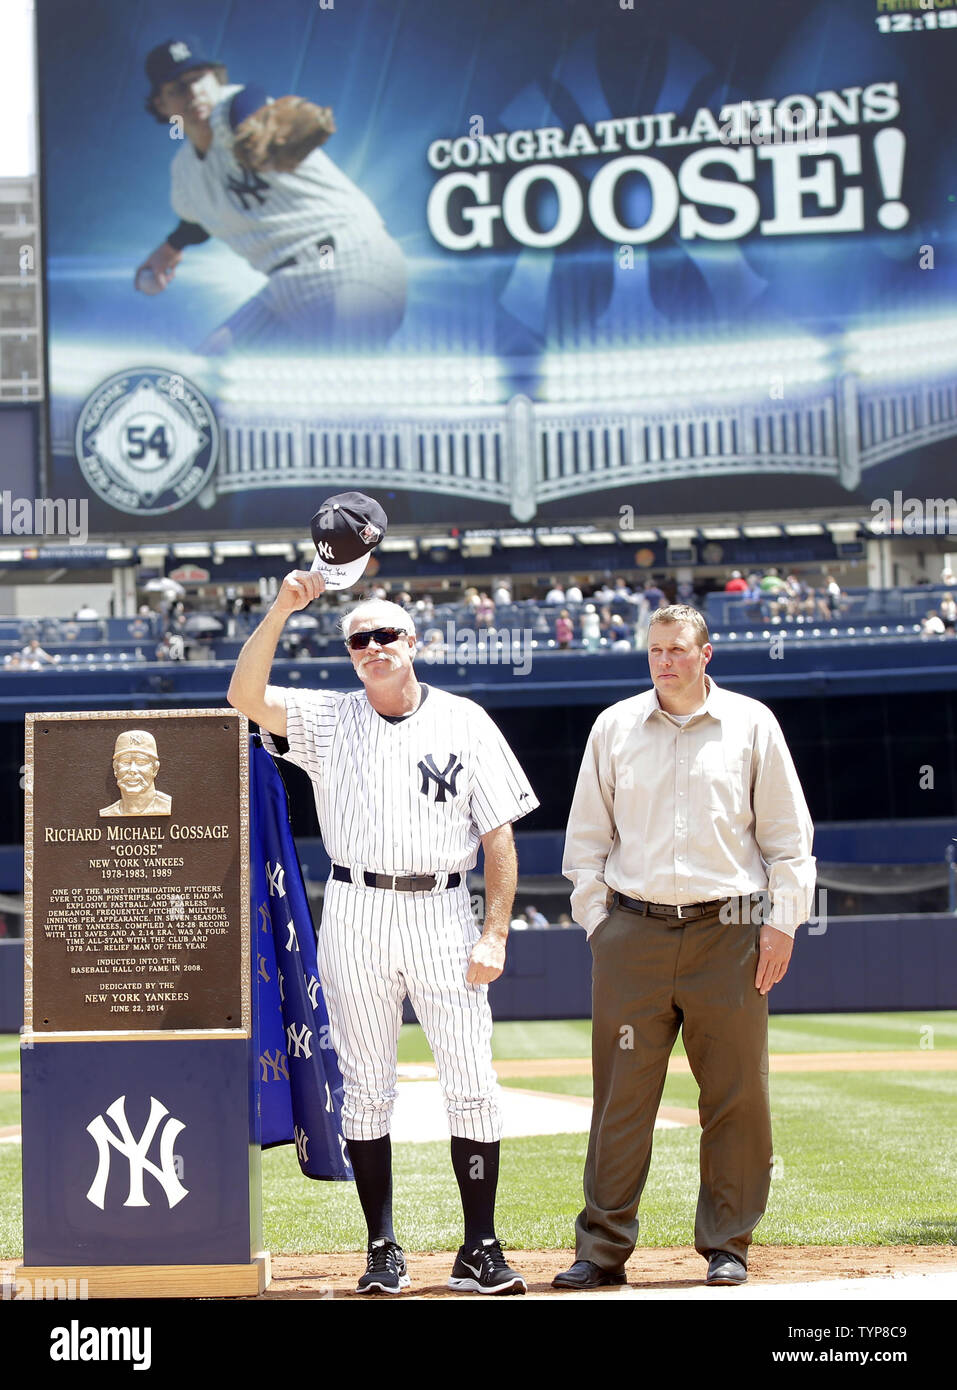 Retired New York Yankee pitcher Goose Gossage tips his cap while looking at his monument that will be placed in Monument Park at the 68th Annual Old-Timers' Day before the New York Yankees play the Baltimore Orioles at Yankee Stadium in New York City on on June 22, 2014.   UPI/John Angelillo Stock Photo